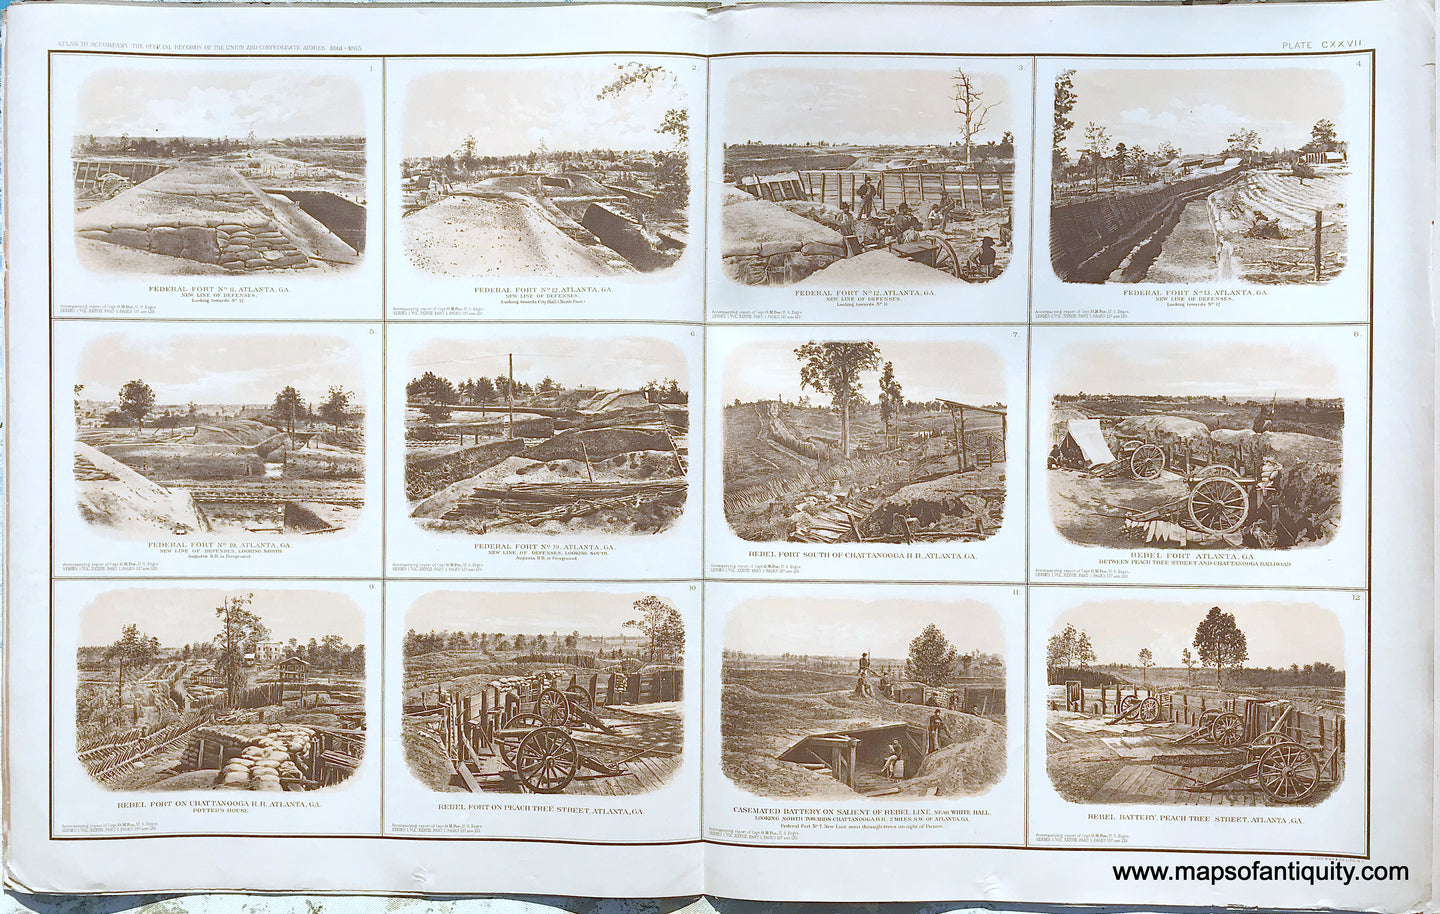 Antique-Lithograph-Print-Plate-127.-Six-photographic-views-of-Federal-Forts-Atlanta-Ga..-Four-views-of-Rebel-Forts-Atlanta-Ga..-Two-views-of-Rebel-Batteries-Atlanta-Ga..-1894-US-War-Dept.-Civil-War-Civil-War-1800s-19th-century-Maps-of-Antiquity